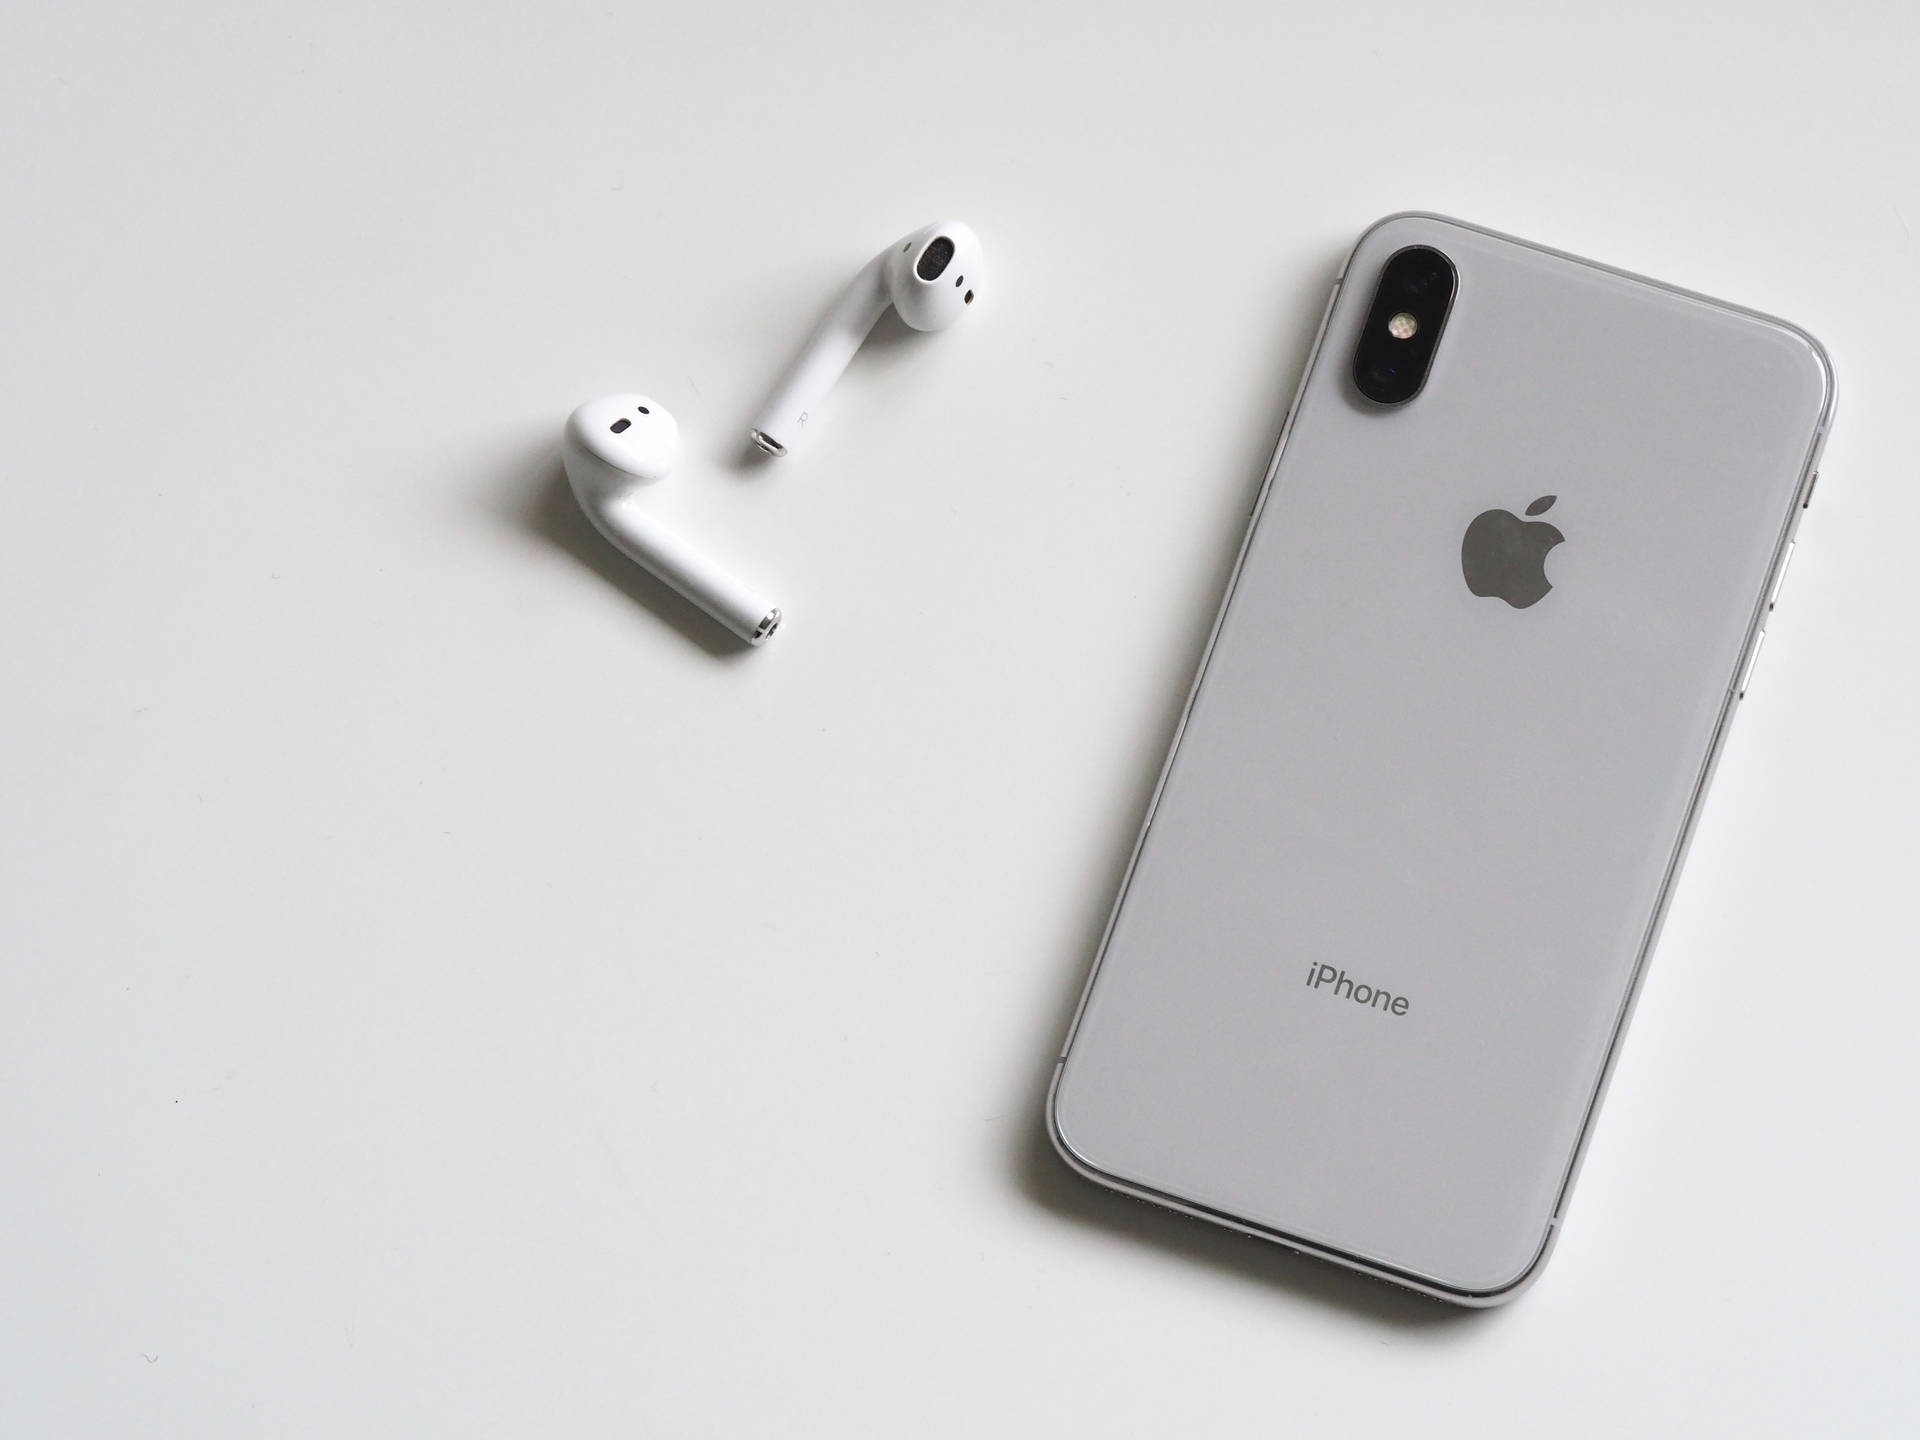 Cool Iphone Air Pods